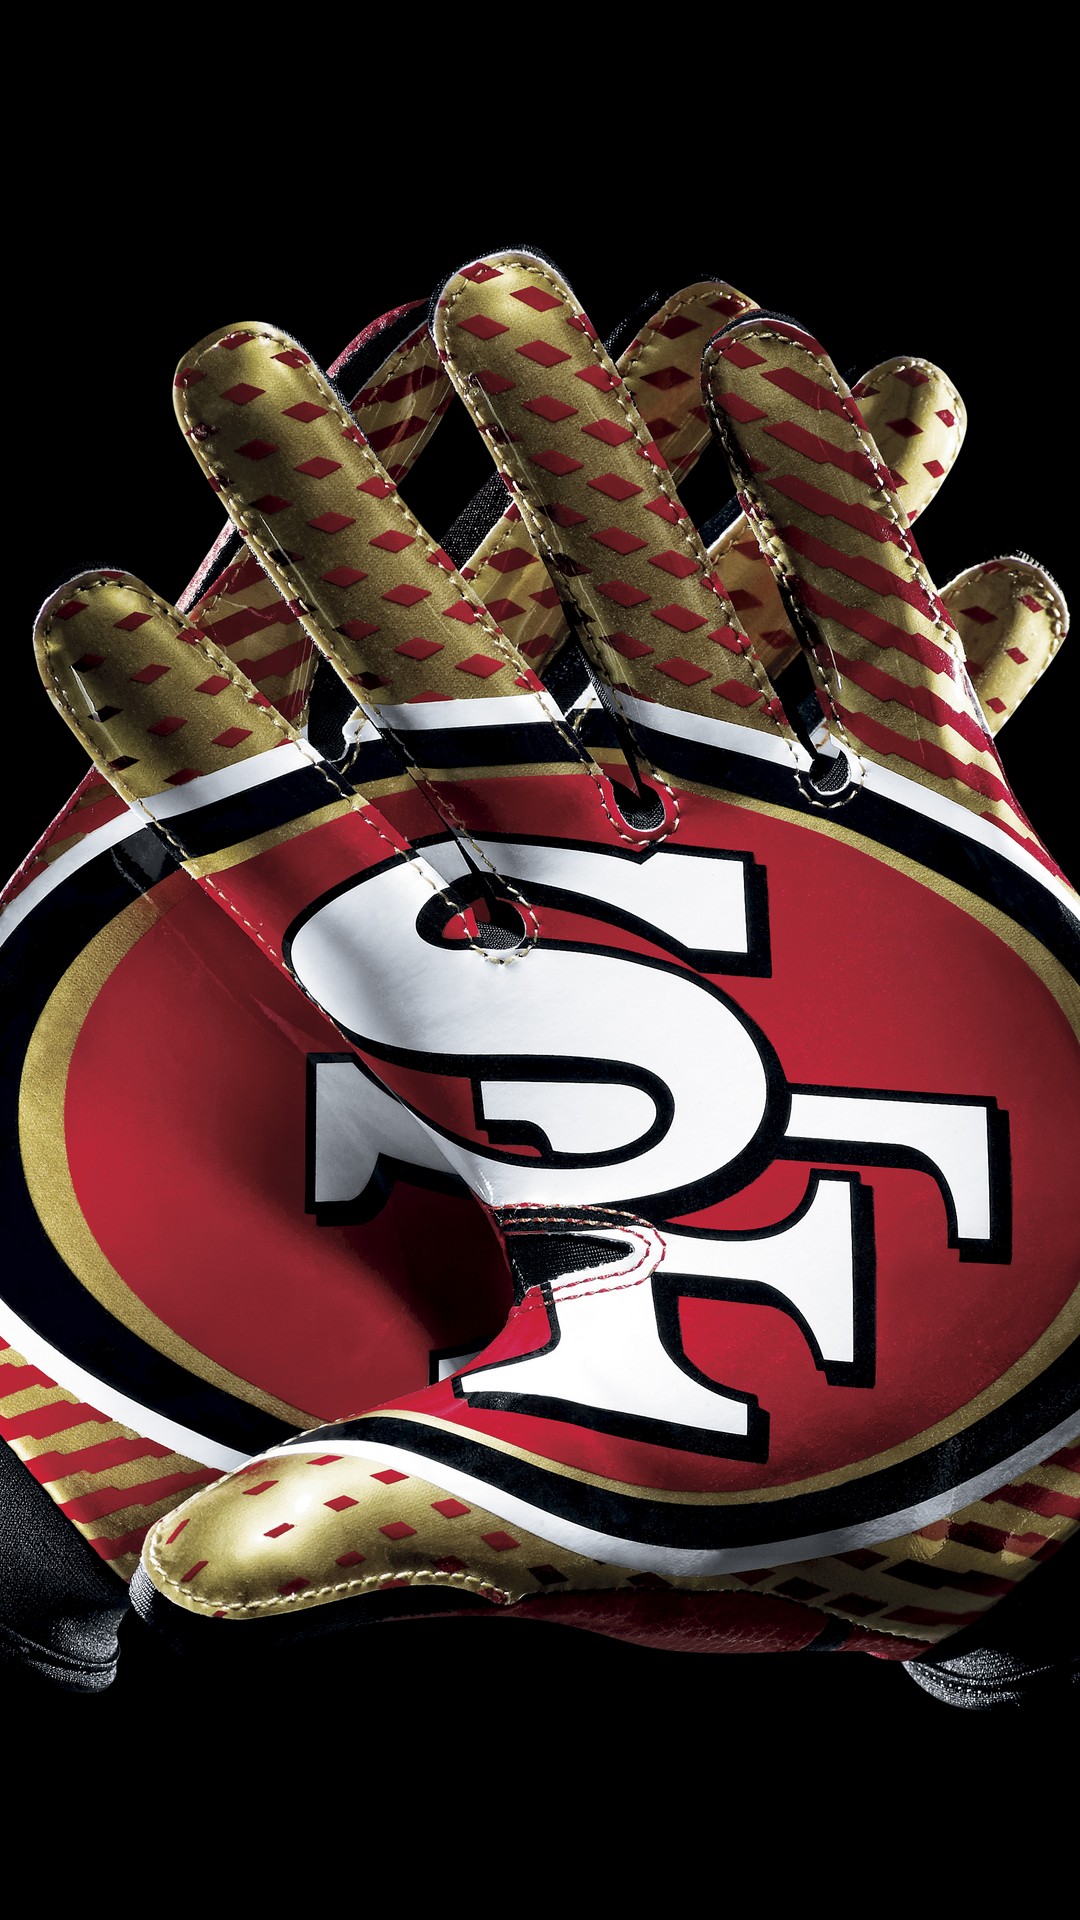 San Francisco 49ers iPhone Wallpaper High Quality with high-resolution 1080x1920 pixel. Donwload and set as wallpaper for your iPhone X, iPhone XS home screen backgrounds, XS Max, XR, iPhone8 lock screen wallpaper, iPhone 7, 6, SE and other mobile devices